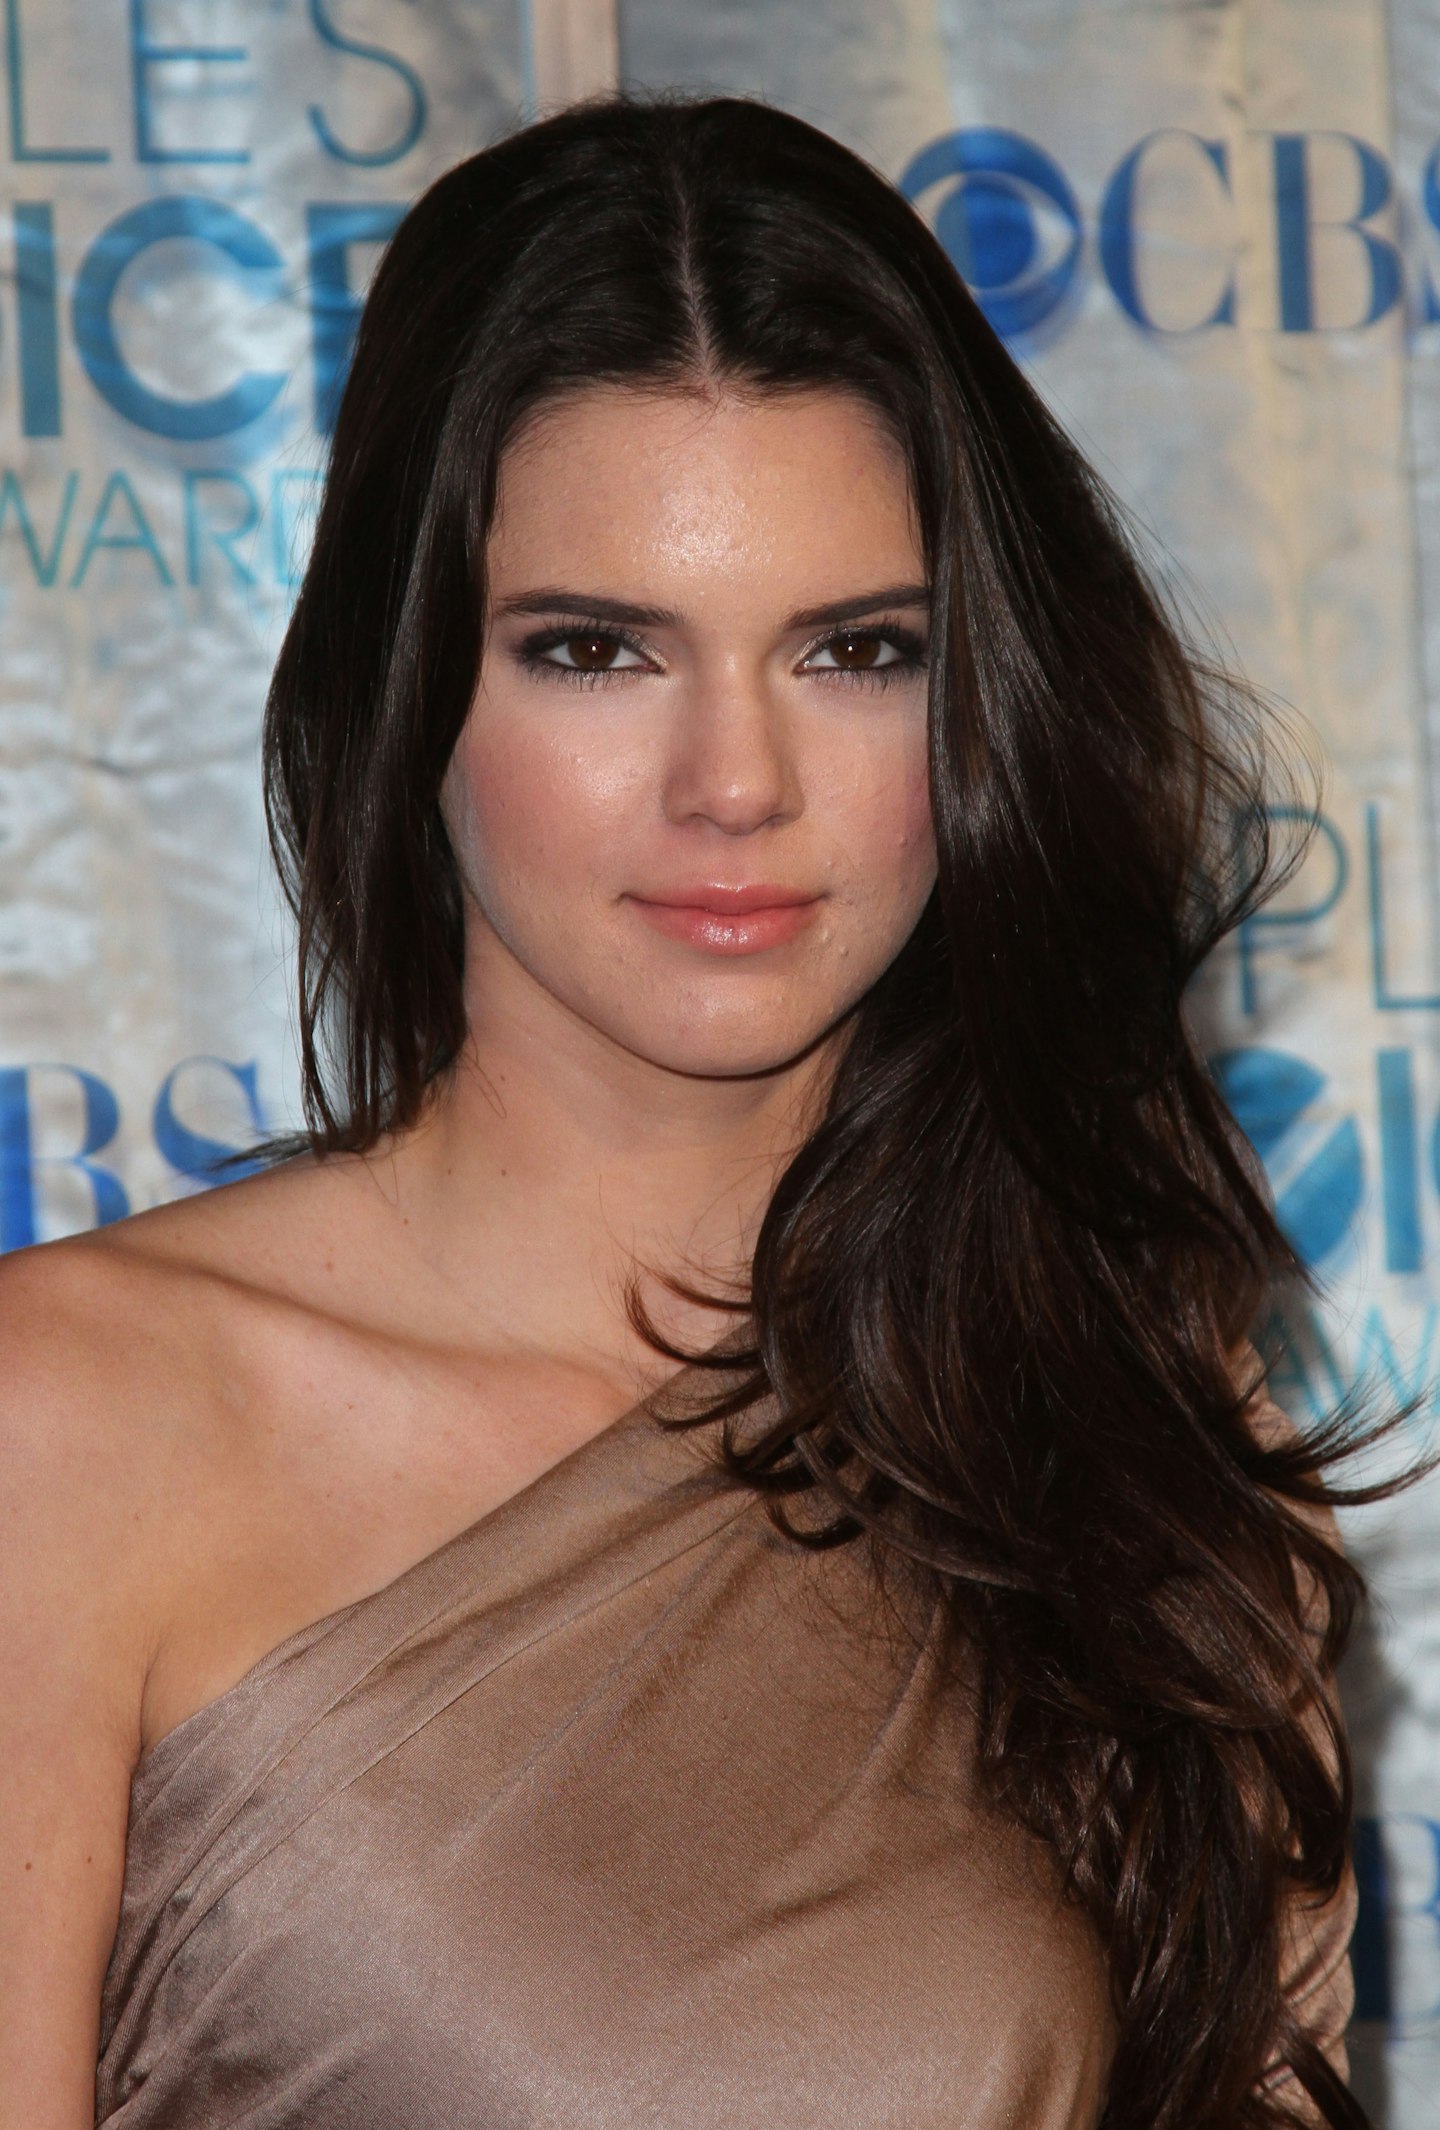 Kendall Jenner 2011 (age 15)